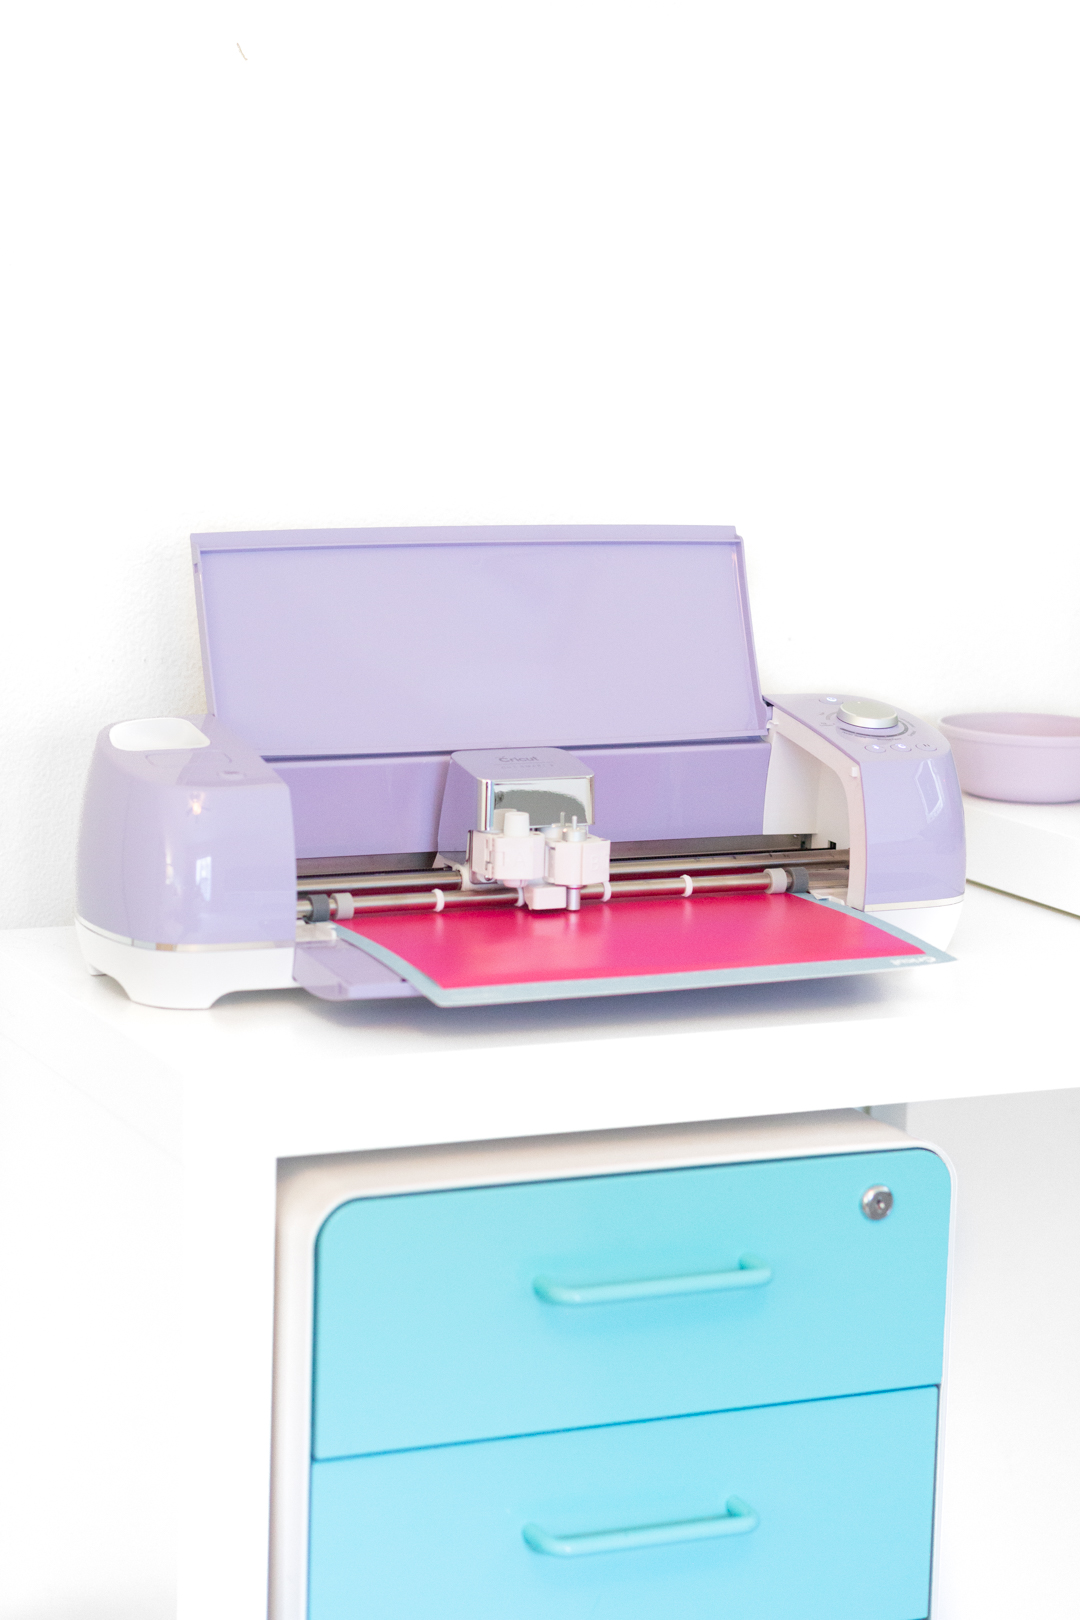 Purple Cricut Explore Air 2 loaded with cricut pink vinyl bing used on a white desk.